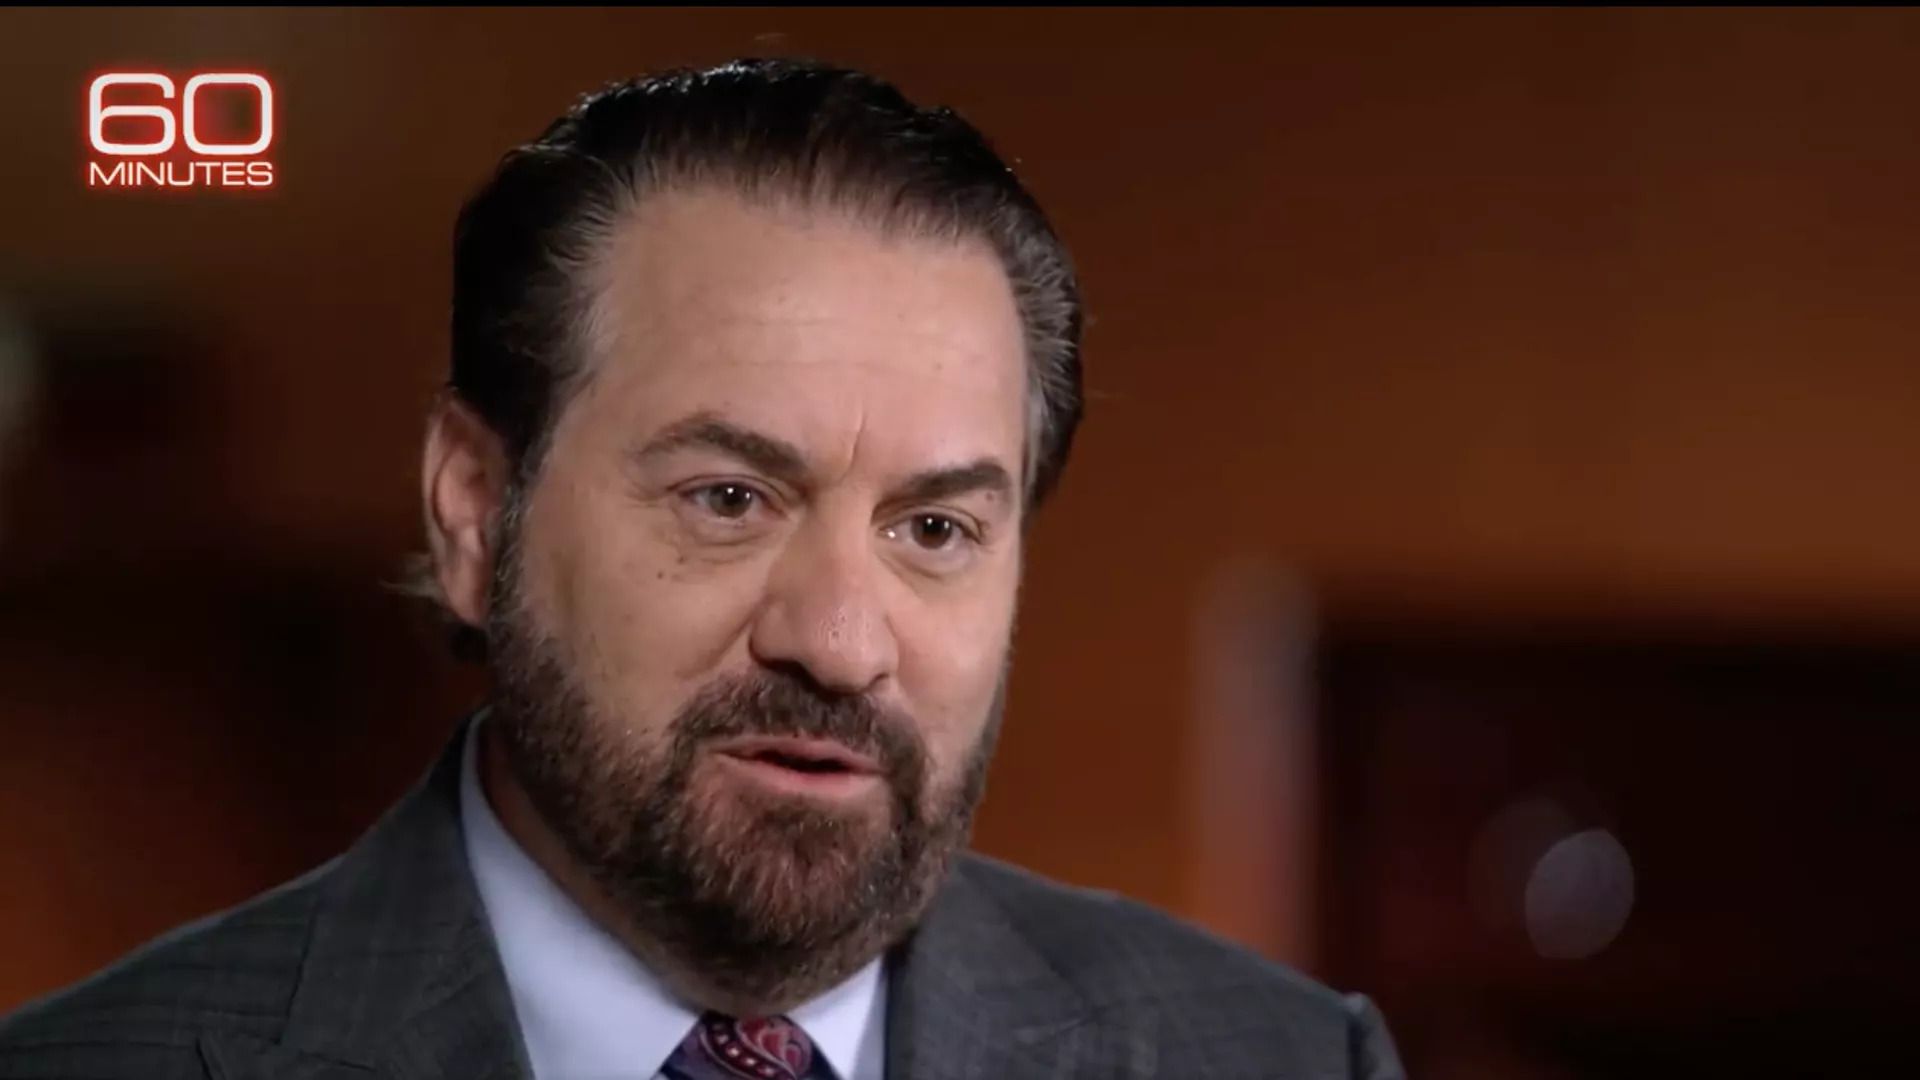 Arizona Attorney General Mark Brnovich speaks during an interview with Sixty Minutes